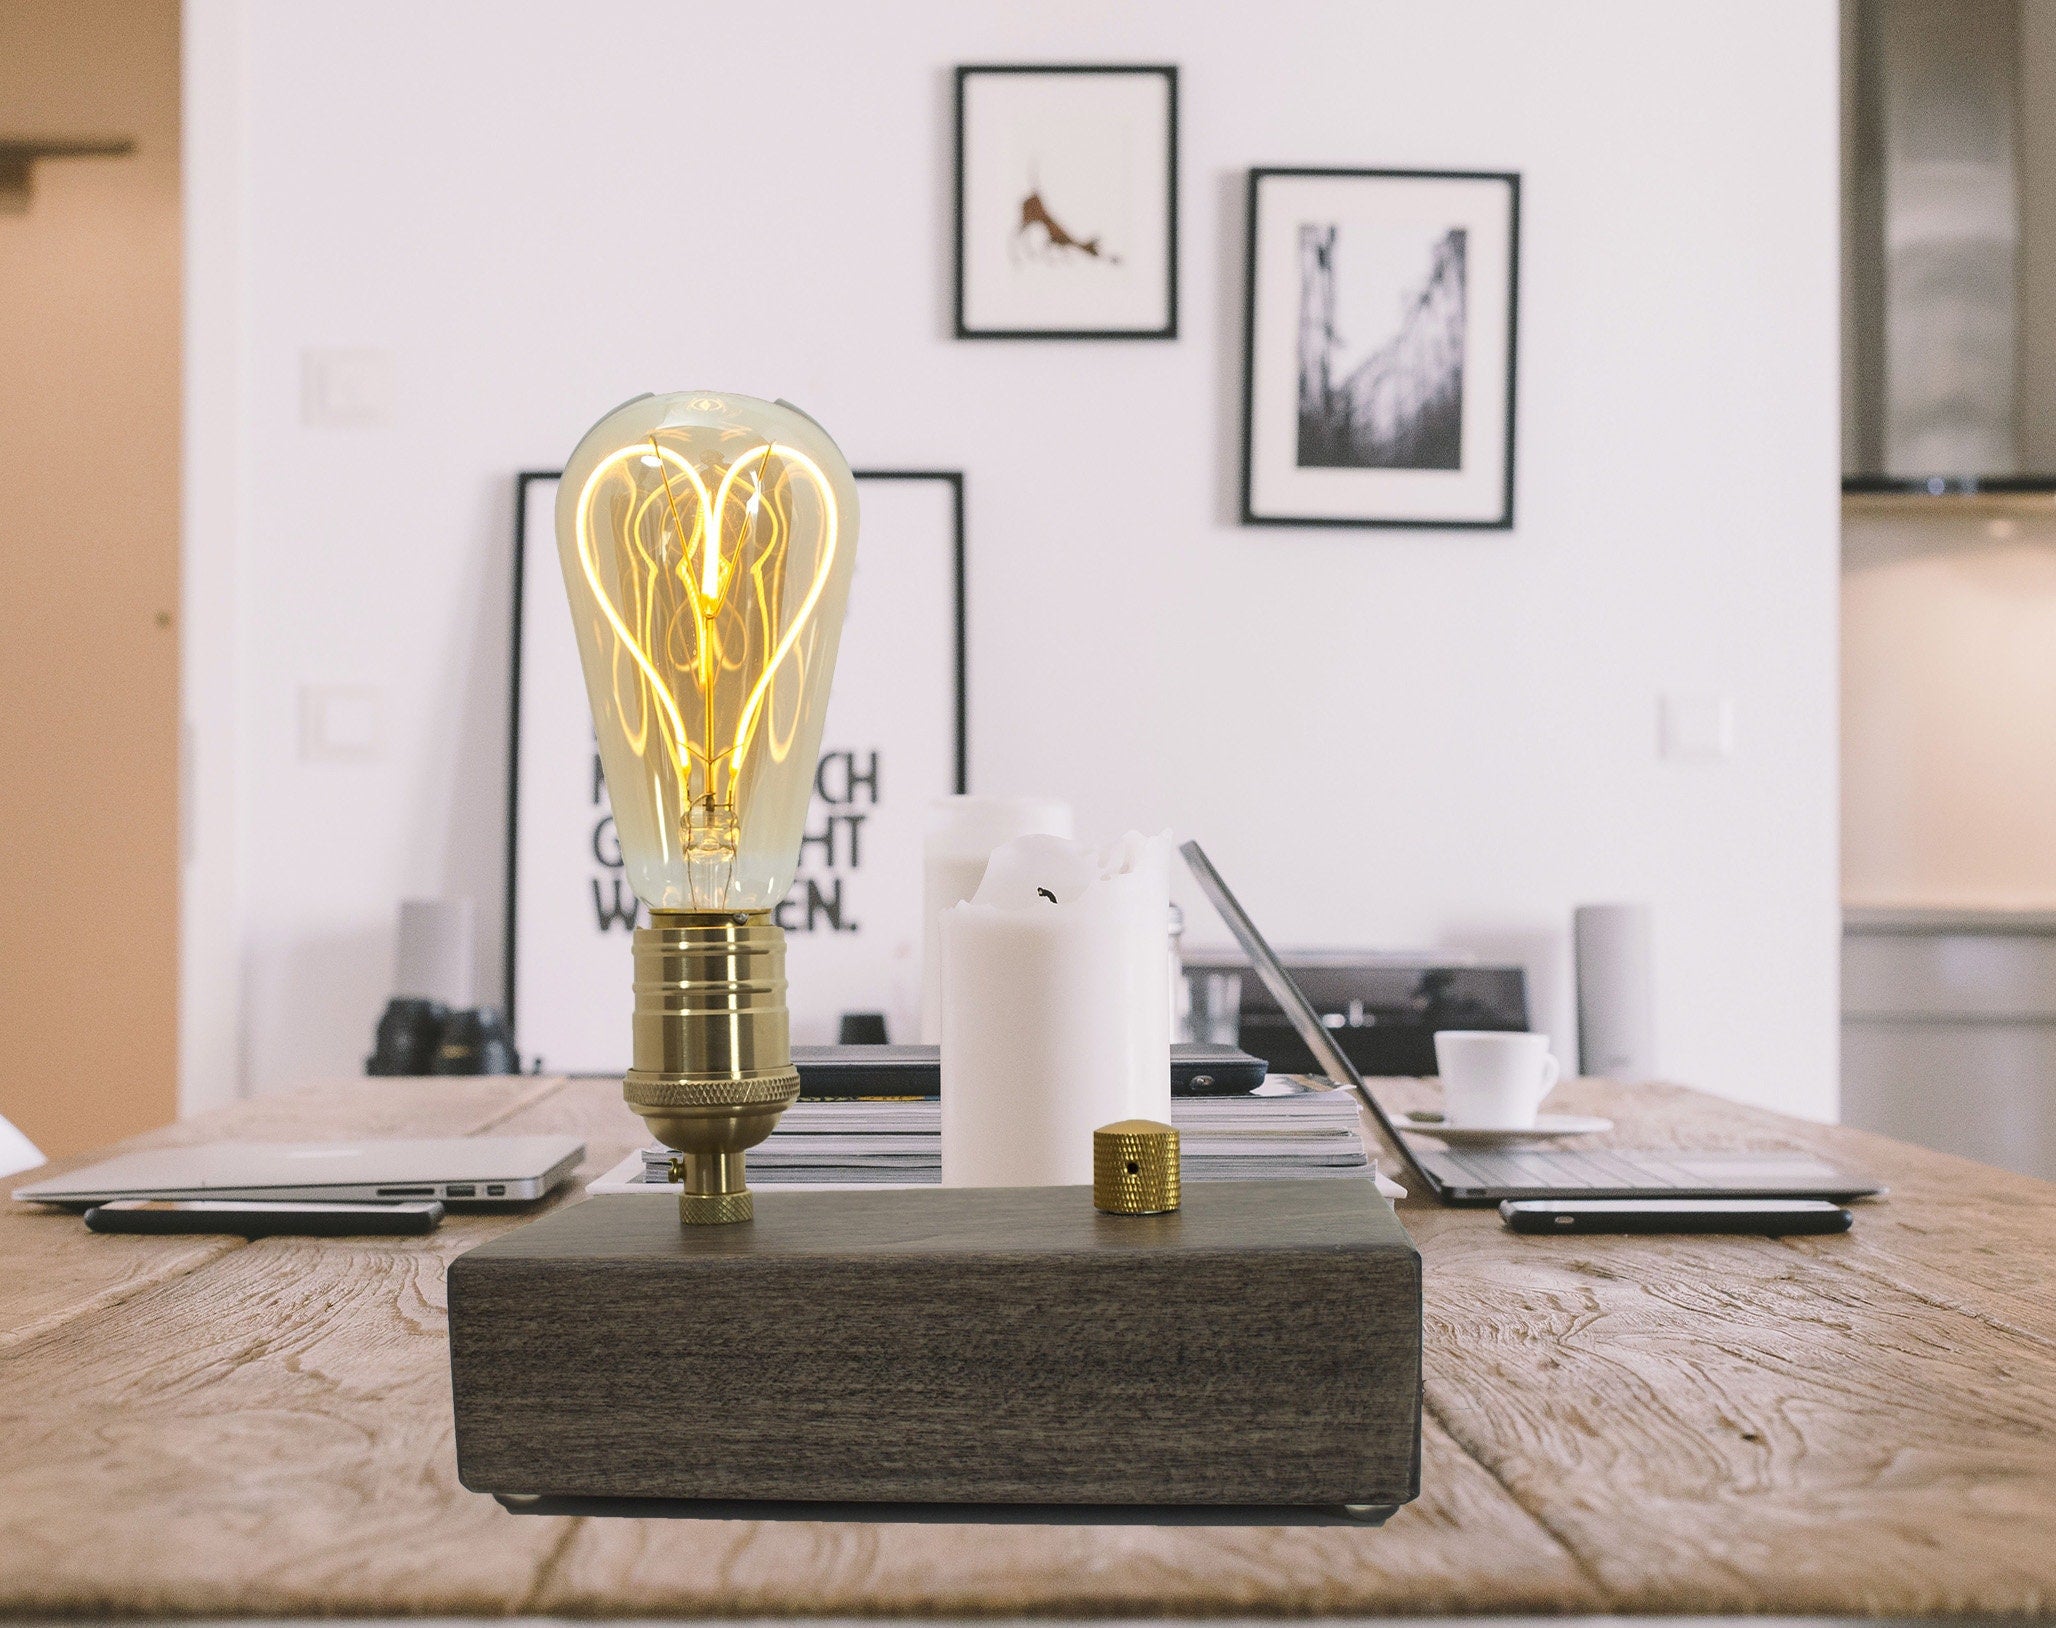 Edison Bulb - Table Lamp with Wood Block dimmable - wood table or desk lamp for Your Industrial Décor - birthday gift, brass socket